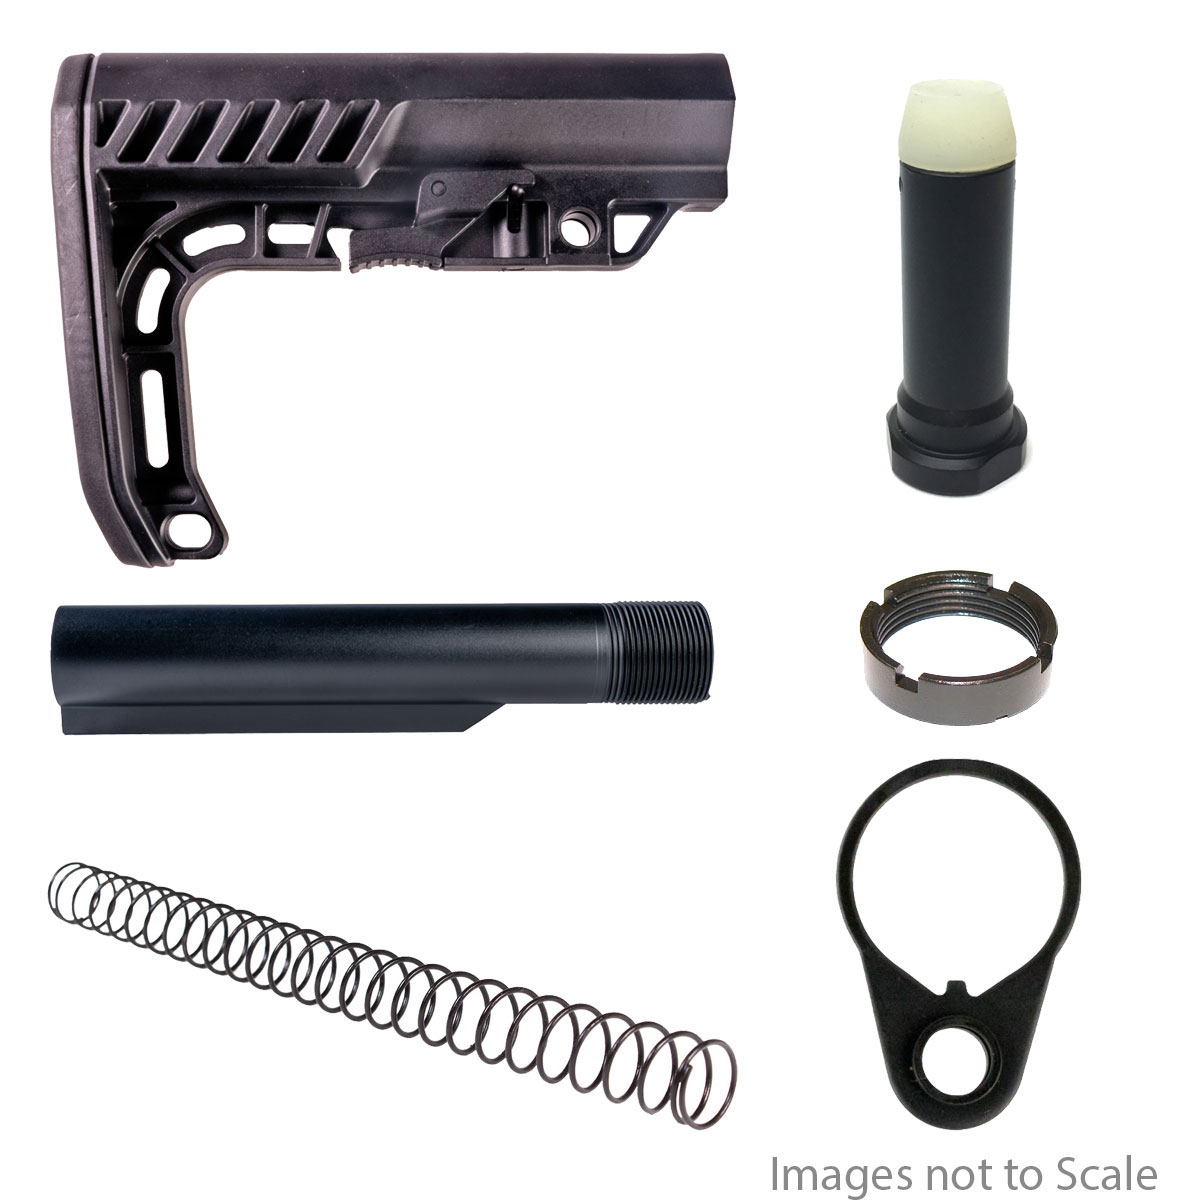 Buffer Tube Kits: End Plate + Mil-Spec Heavy-Duty 6-Position Buffer Tube + KAK Industry LR-308 Carbine Recoil Spring for Collapsible Stock + Omega Mfg. LR-308 Collapsible Stock Buffer + AR-15 Carbine Castle Nut + Gauntlet Arms Minimalist AR-15 Stock